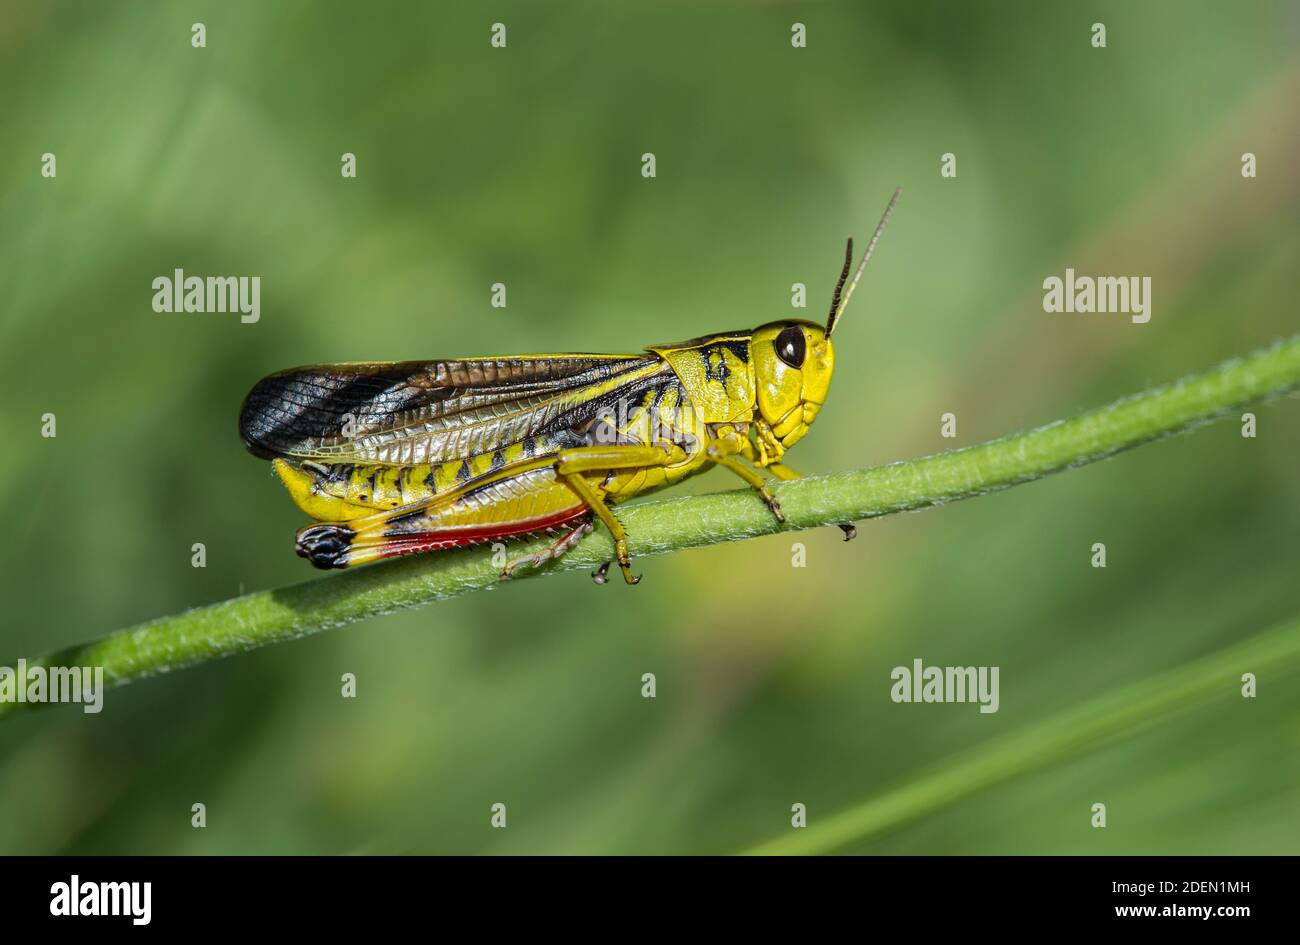 Large banded grasshopper (Arcyptera fusca), male, a Short-horned grasshopper from the Acrididae family, Valais, Switzerland Stock Photo